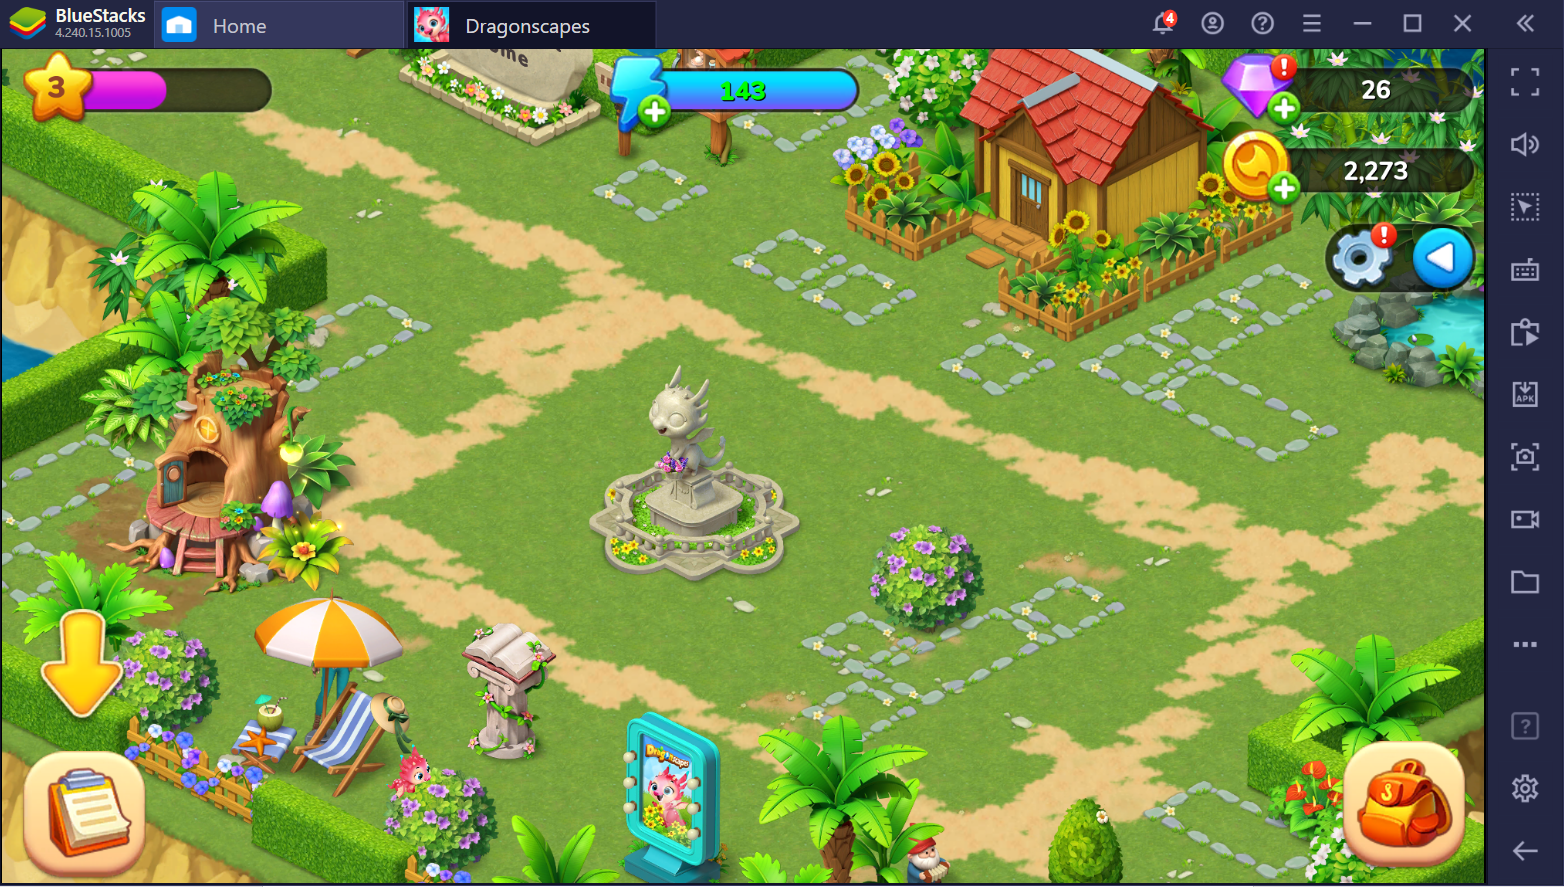 Dragonscapes Adventure on PC with BlueStacks: A Fun and Relaxing Game with Dragons!